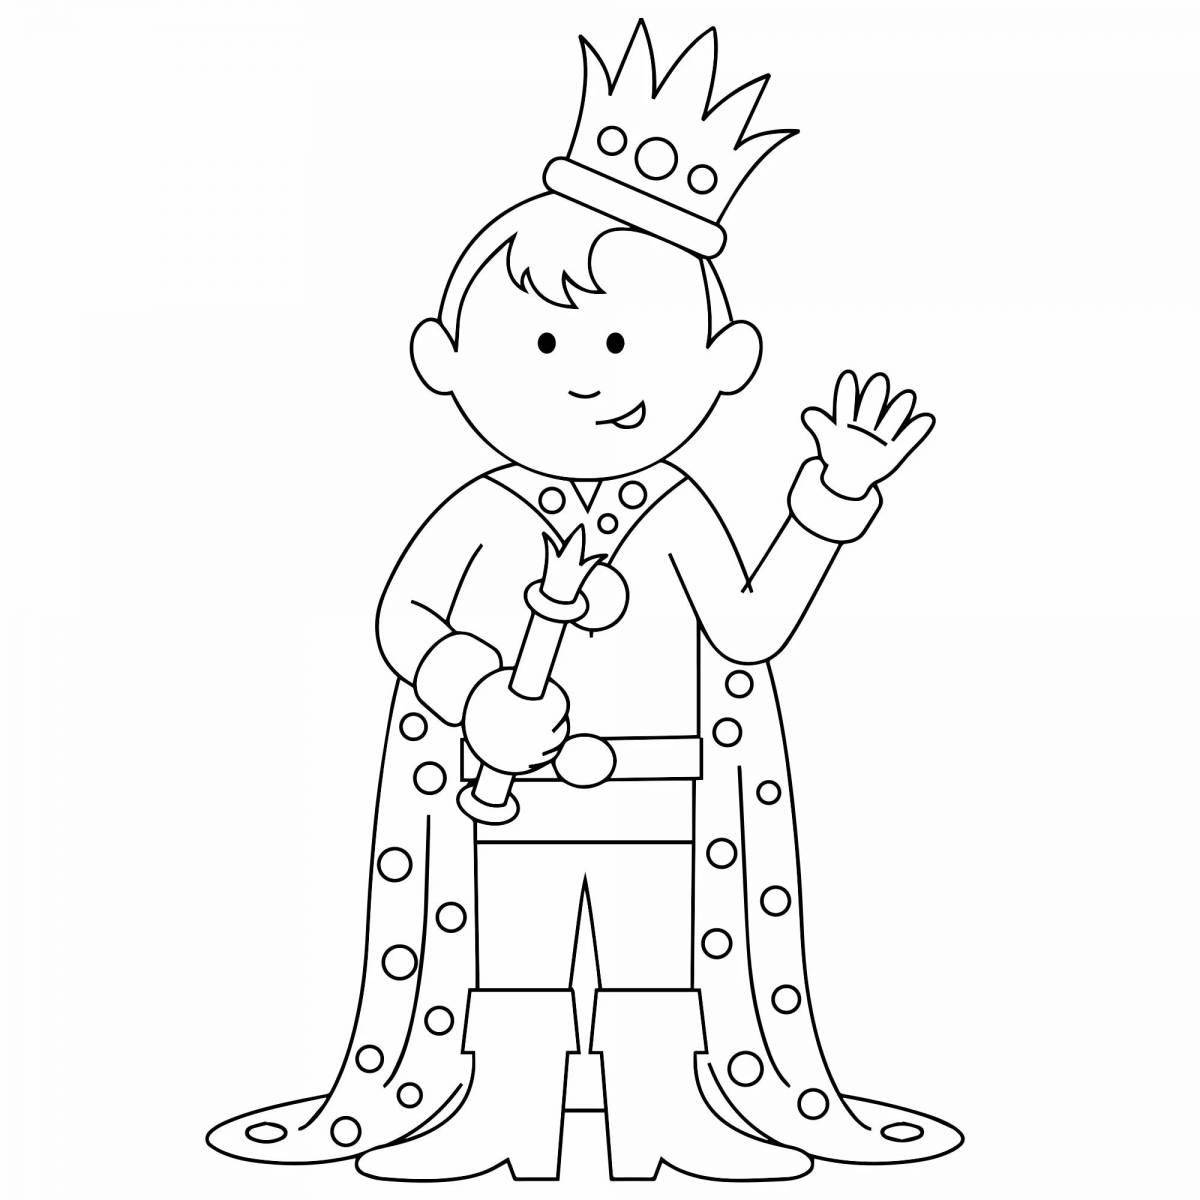 Prince dazzling coloring book for kids